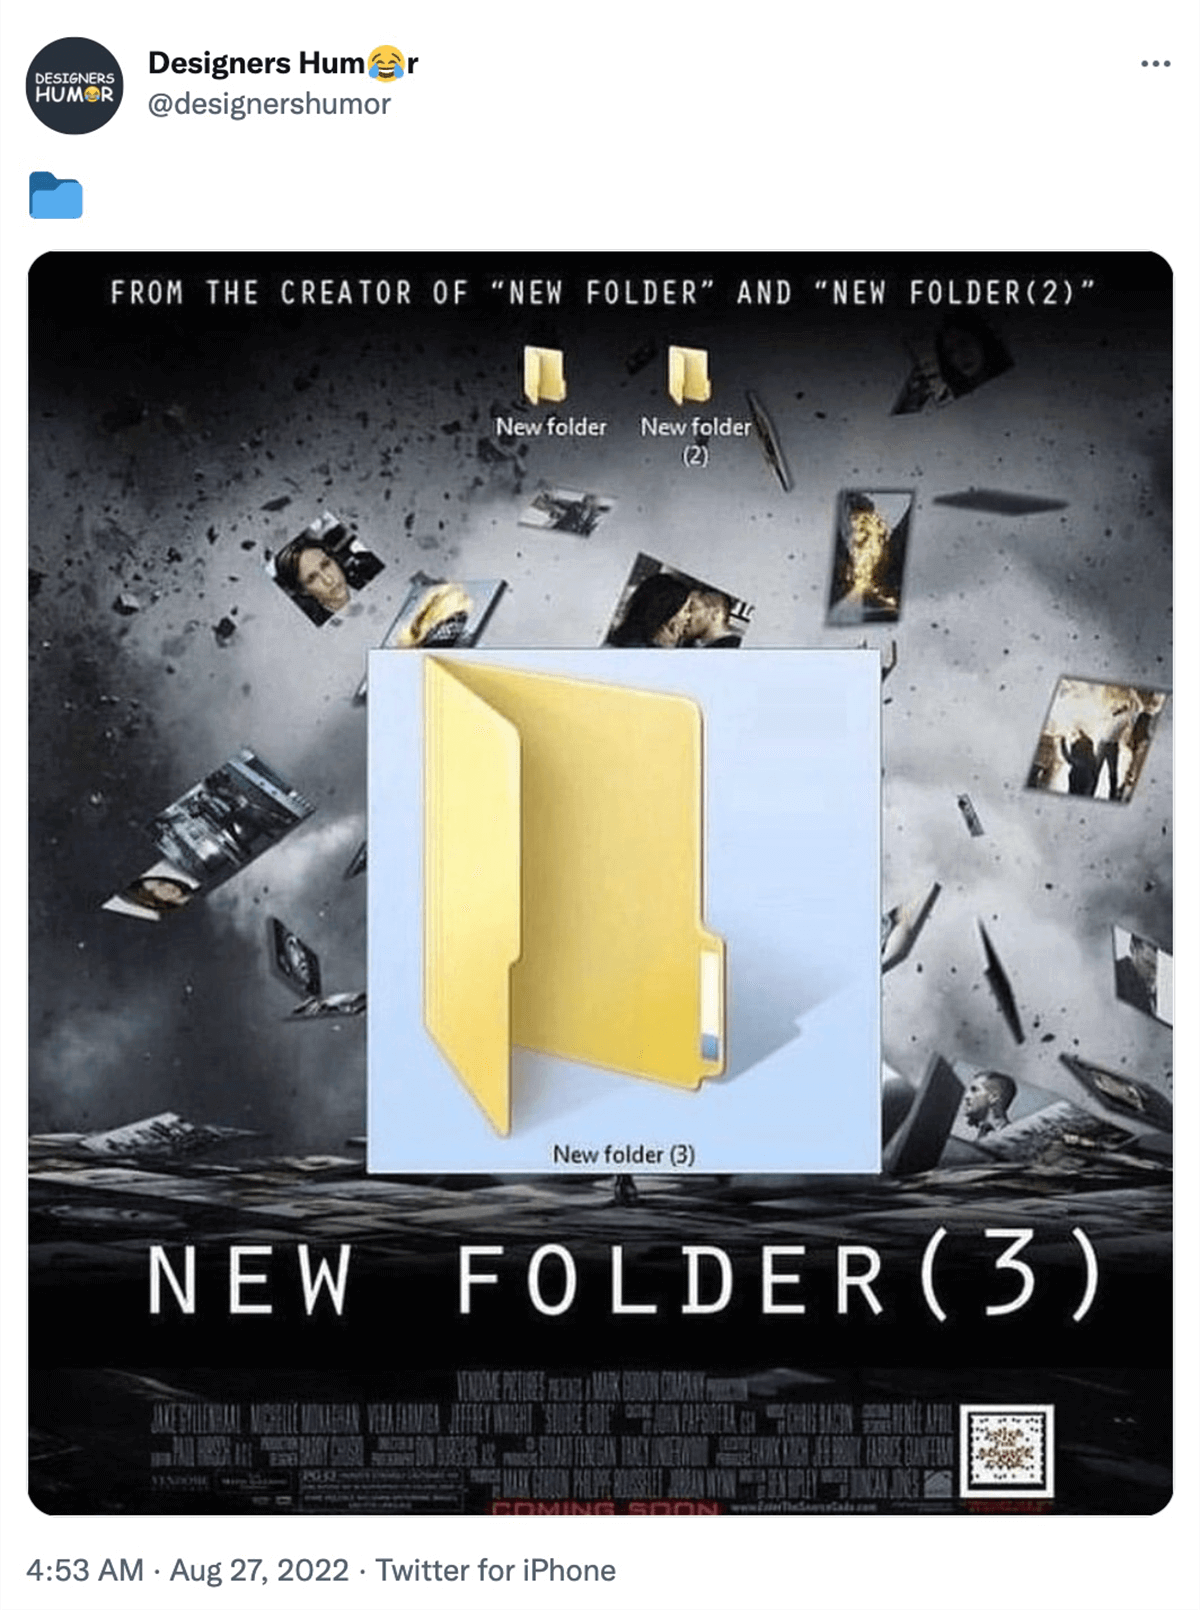 @designershumor on twitter: a movie poster that says From the creator of New Folder and Folder(2) comes Folder(3)